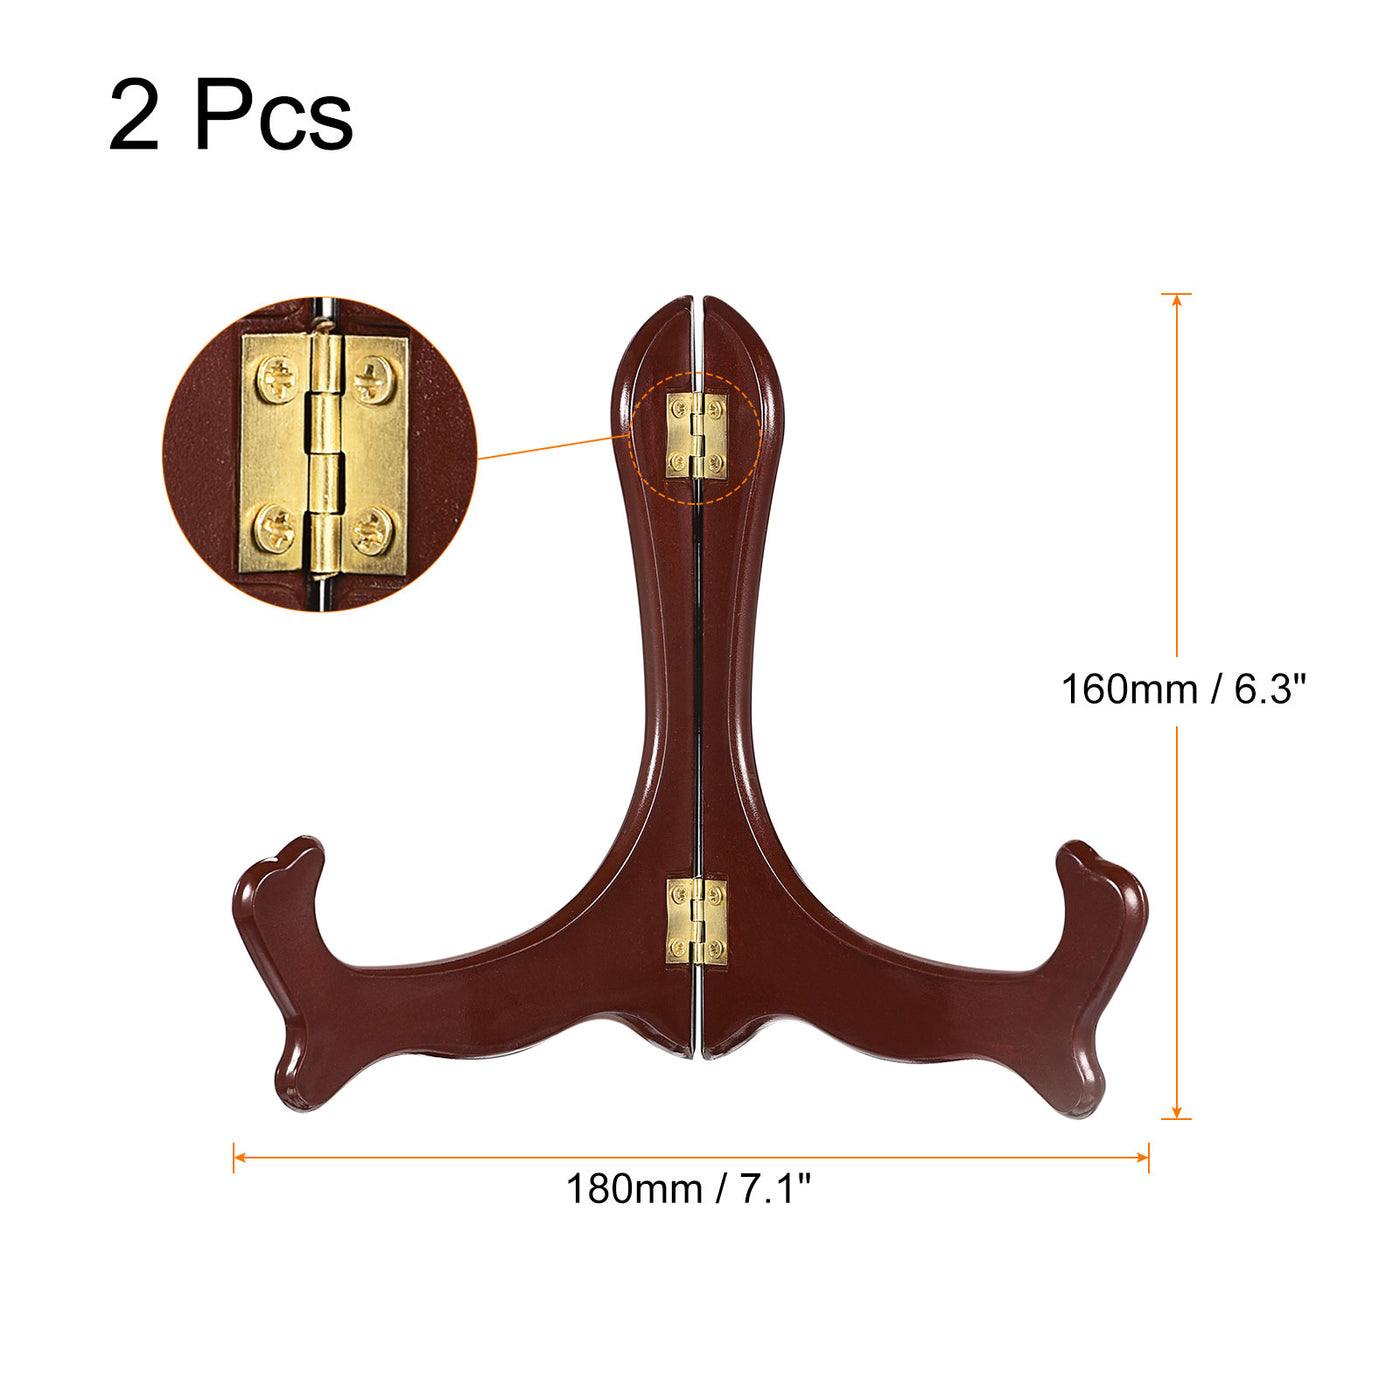 uxcell Uxcell 2pcs 6.3" Easel Plate Holder, Wood-like Plastic Folding Display Stand Brown for Decorative Picture Frame